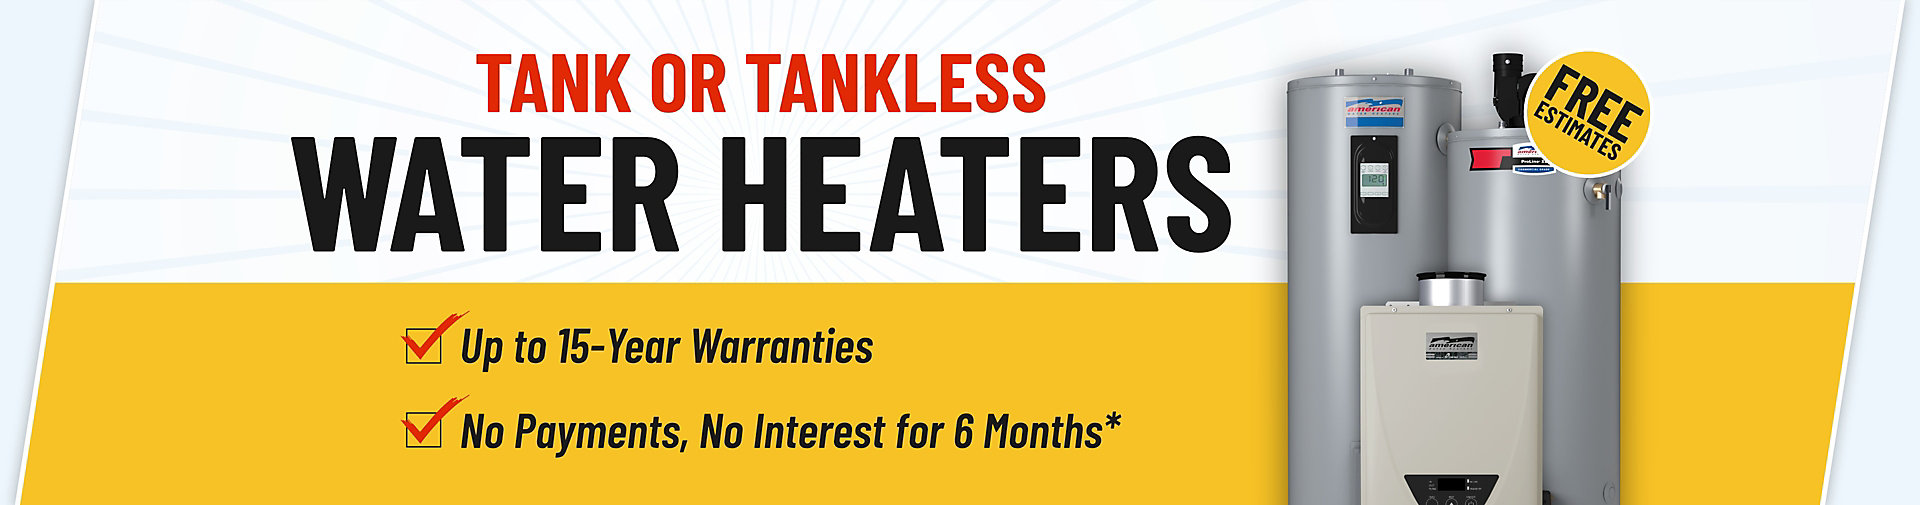 Tank Or Tankless Water Heaters